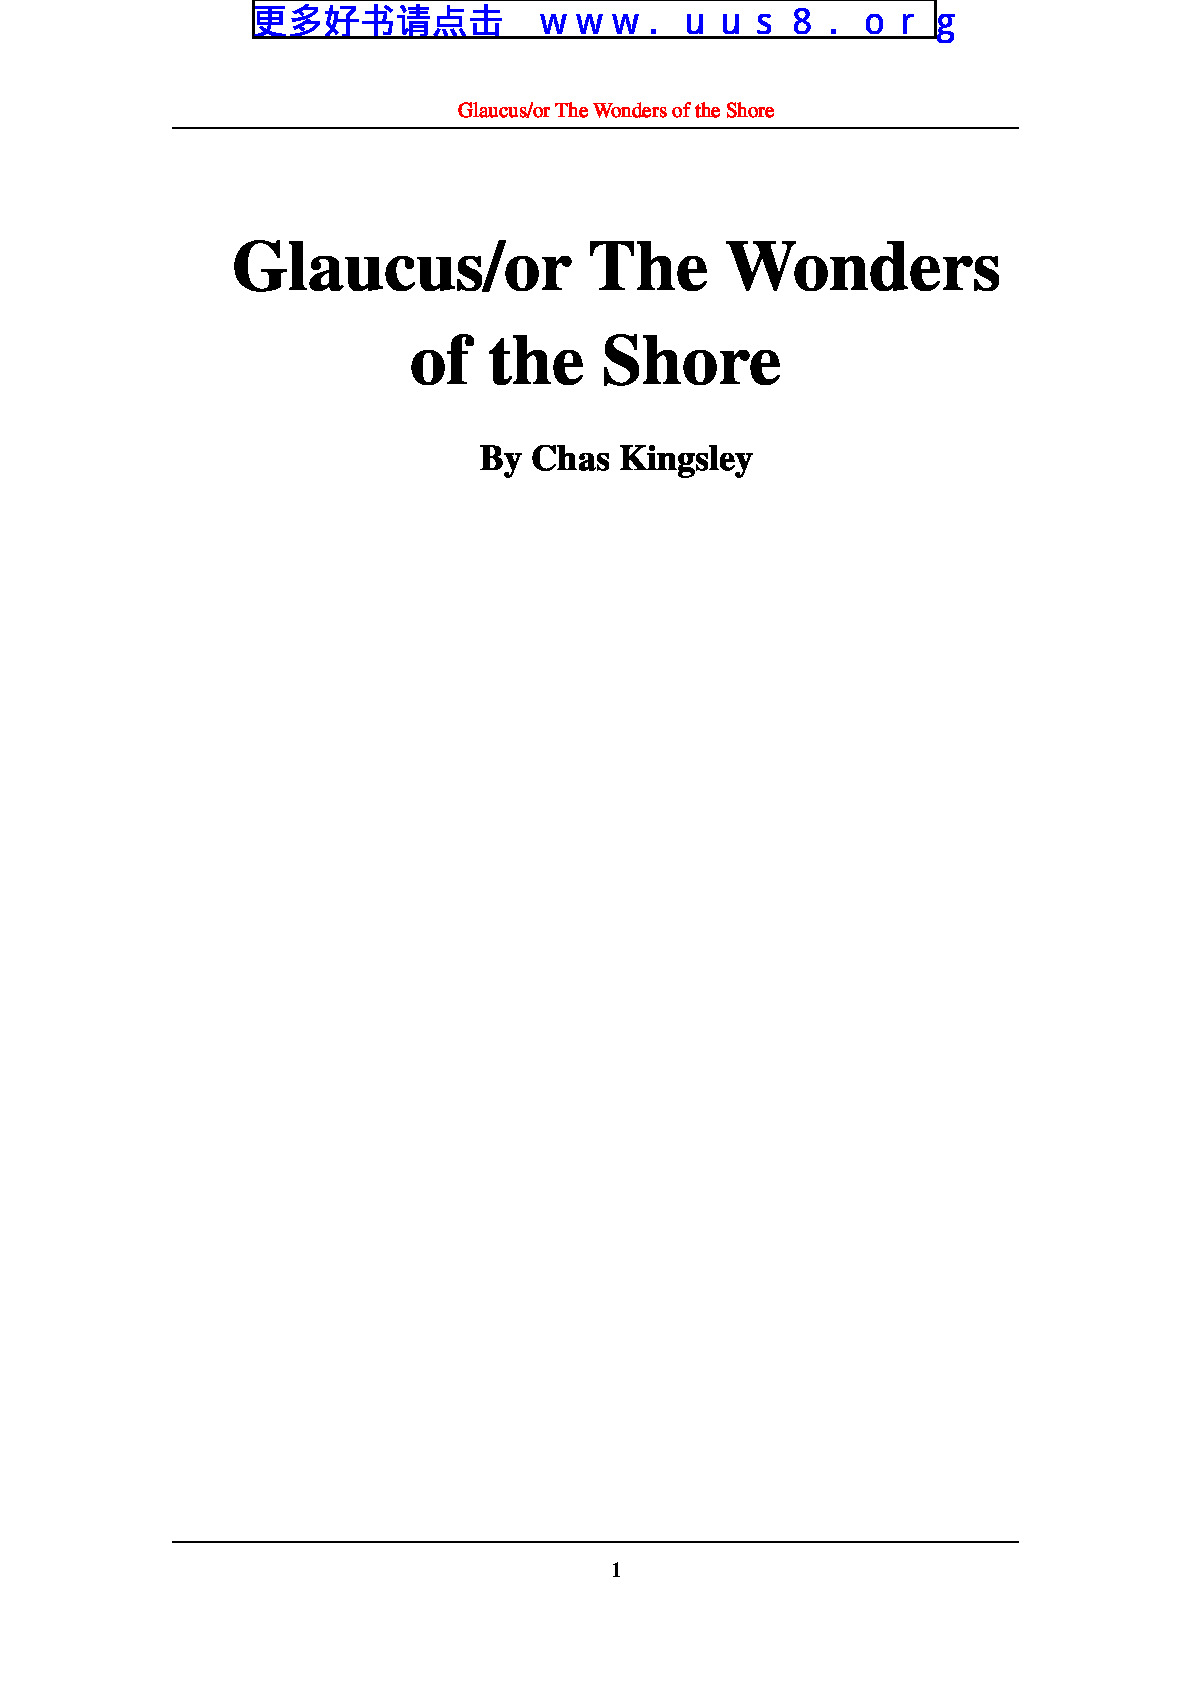 Glaucus-or_The_Wonders_of_the_Shore(格劳高斯)